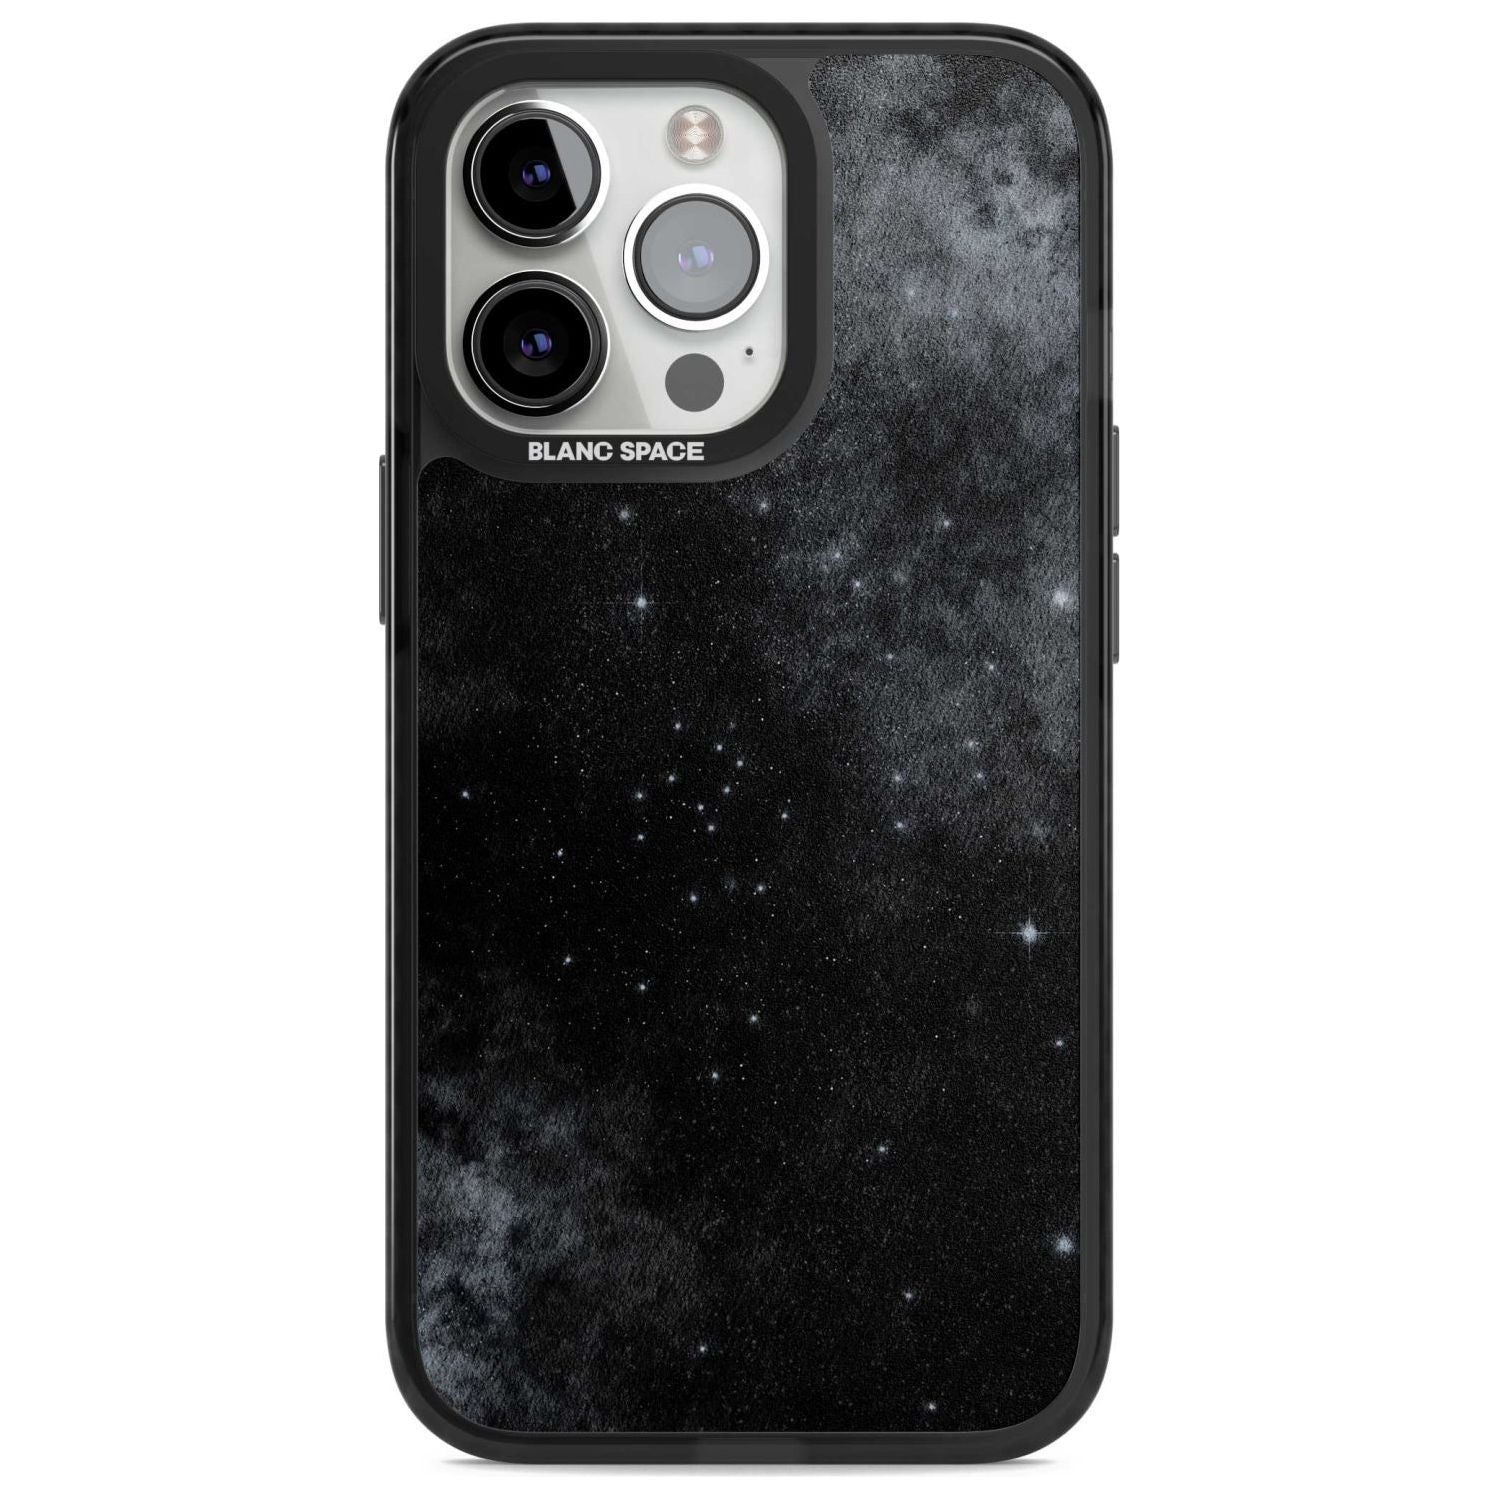 Night Sky Galaxies: Shimmering Stars Phone Case iPhone 15 Pro / Magsafe Black Impact Case,iPhone 15 Pro Max / Magsafe Black Impact Case,iPhone 14 Pro Max / Magsafe Black Impact Case,iPhone 13 Pro / Magsafe Black Impact Case,iPhone 14 Pro / Magsafe Black Impact Case Blanc Space